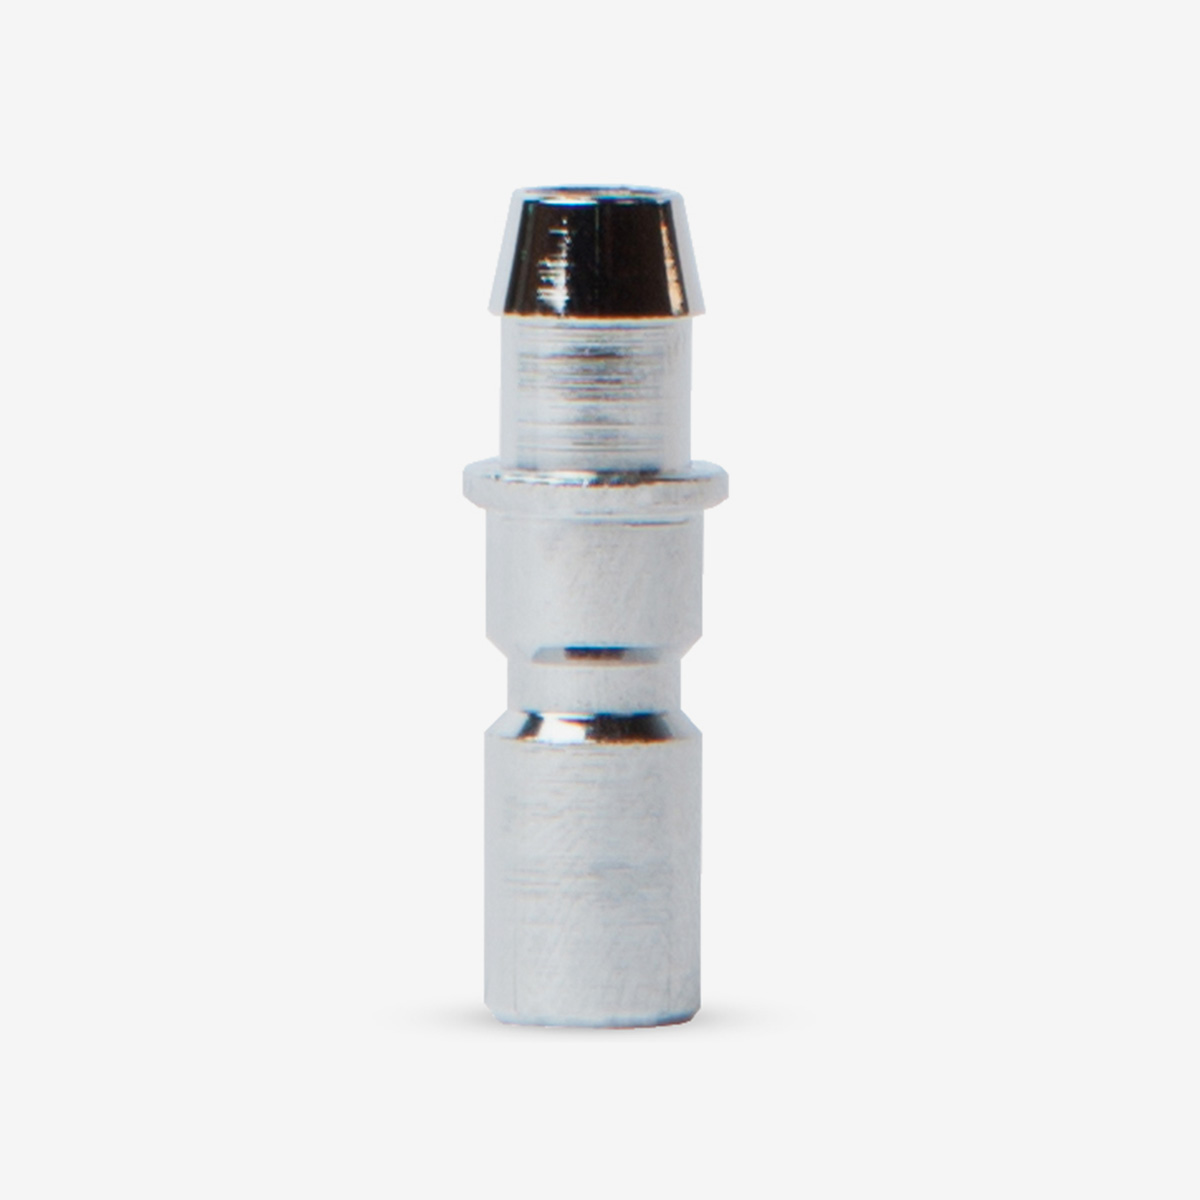 Silver BC Adapter on White background